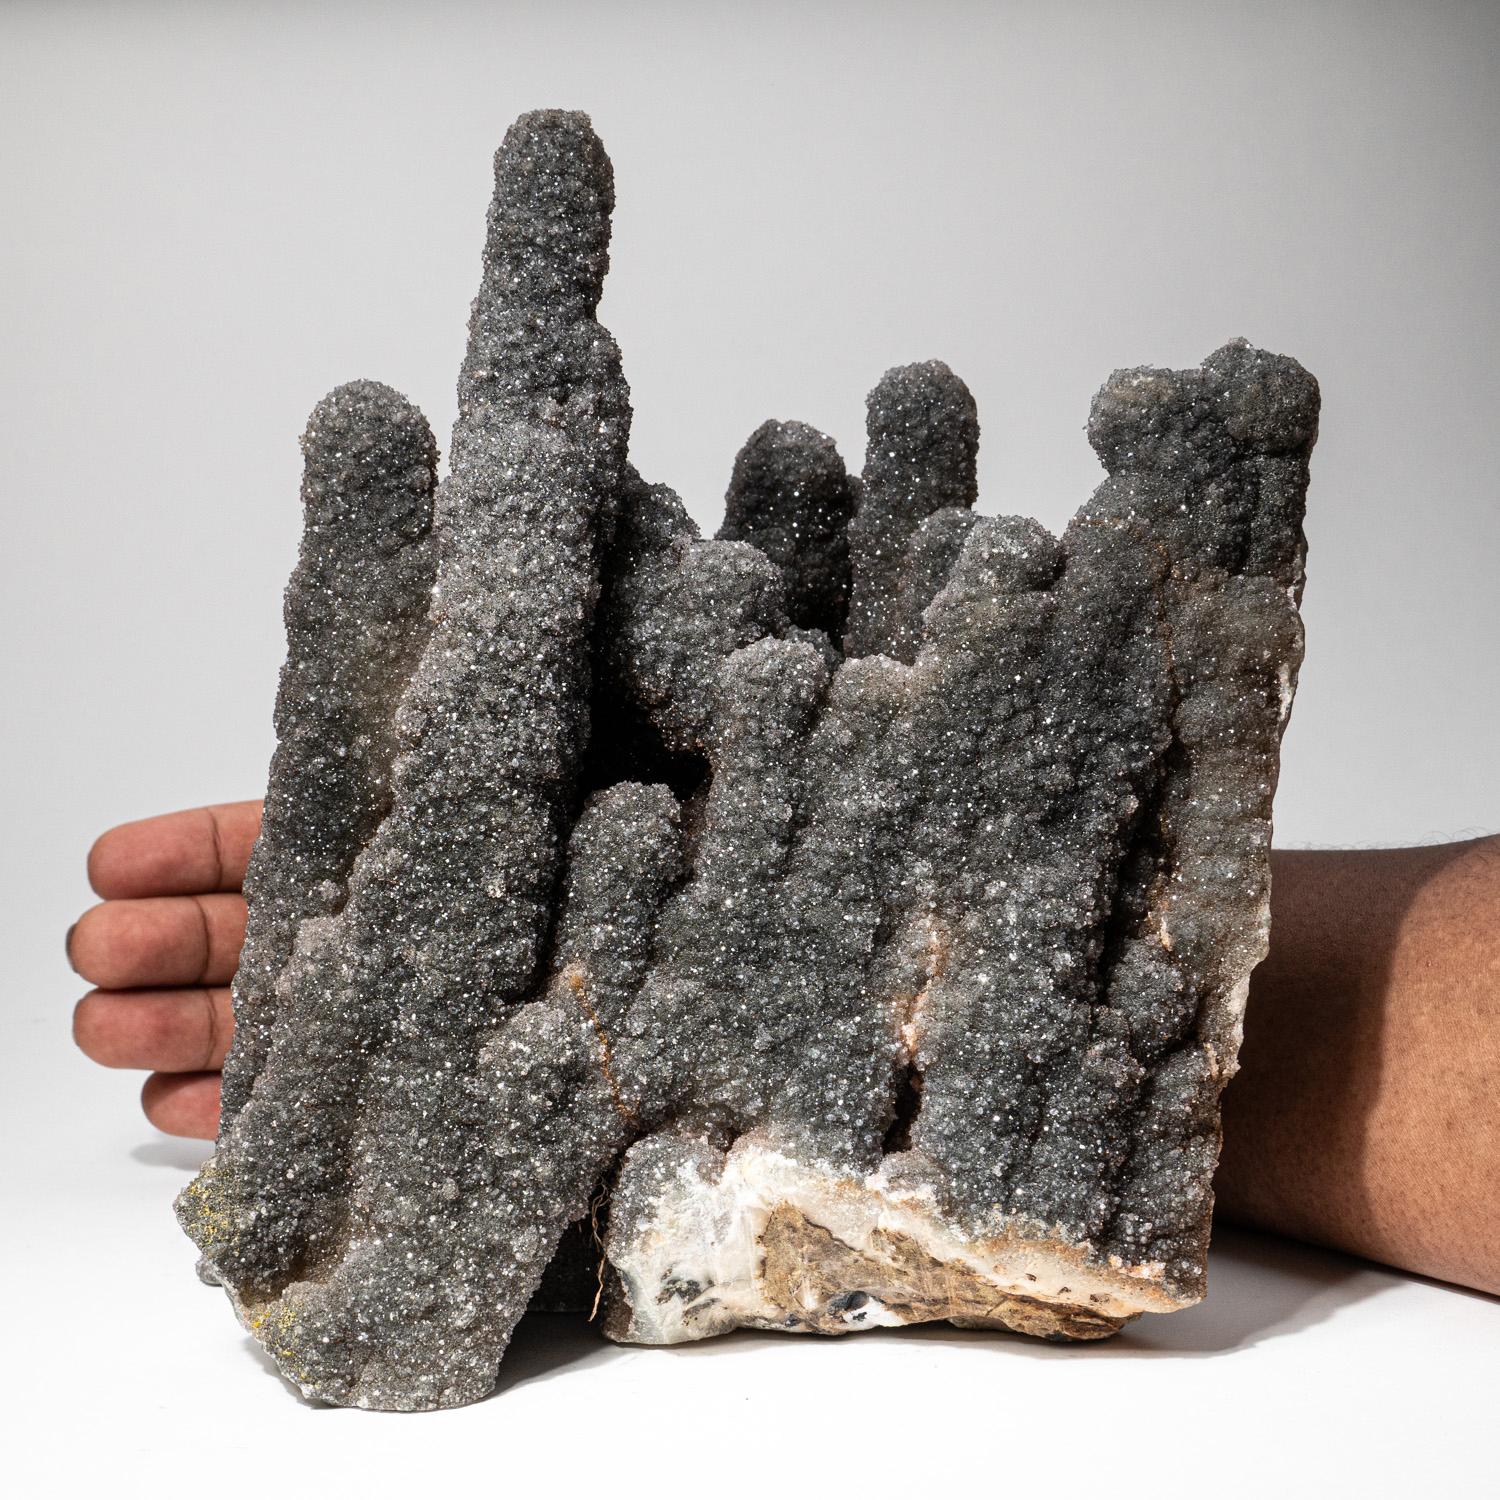 This amazing stalactite formations are the height of beauty, with glittering druzy crystalline blossoms covering a cluster of long, finger-like projections. A stunning choice for any collection. Stalactite balances the energies of the mind, body and